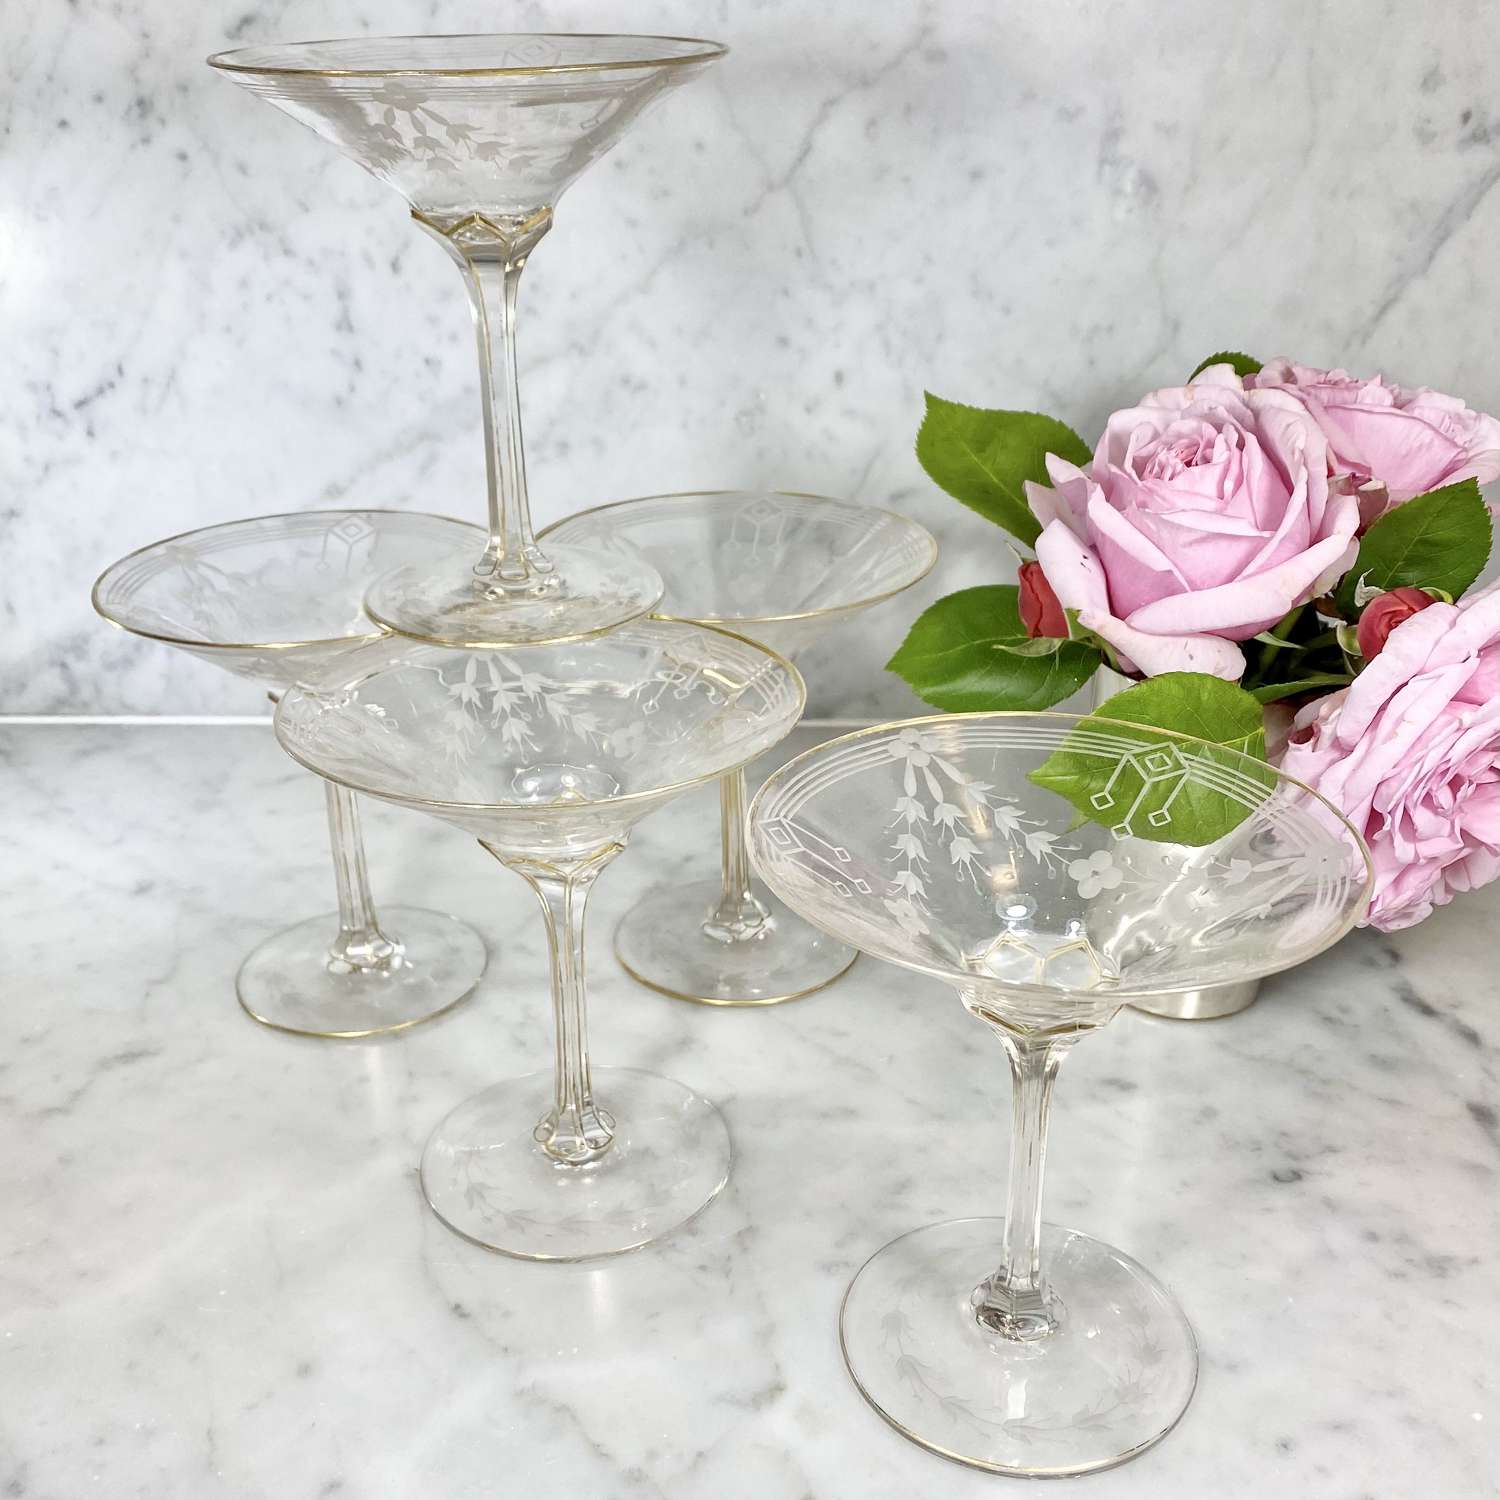 Exceptionally rare Art Nouveau etched champagne or cocktail saucers